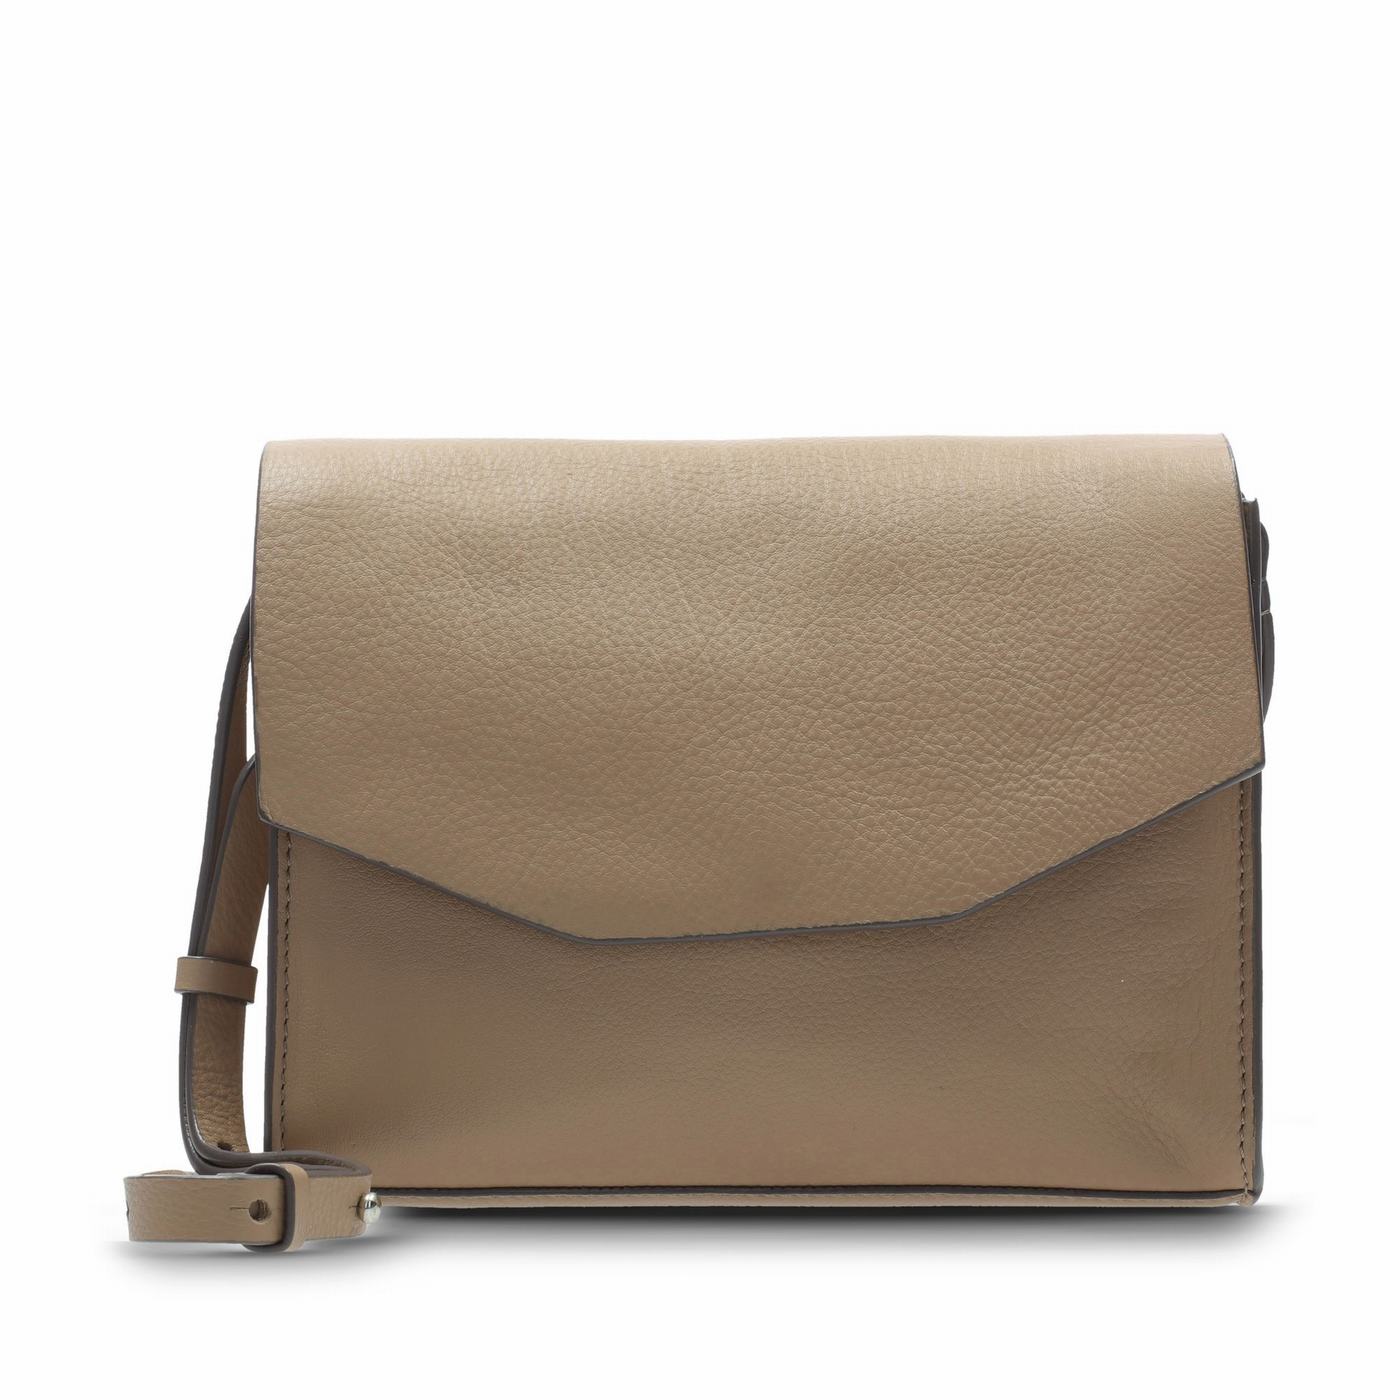 Clarks Womens Bags Online India 